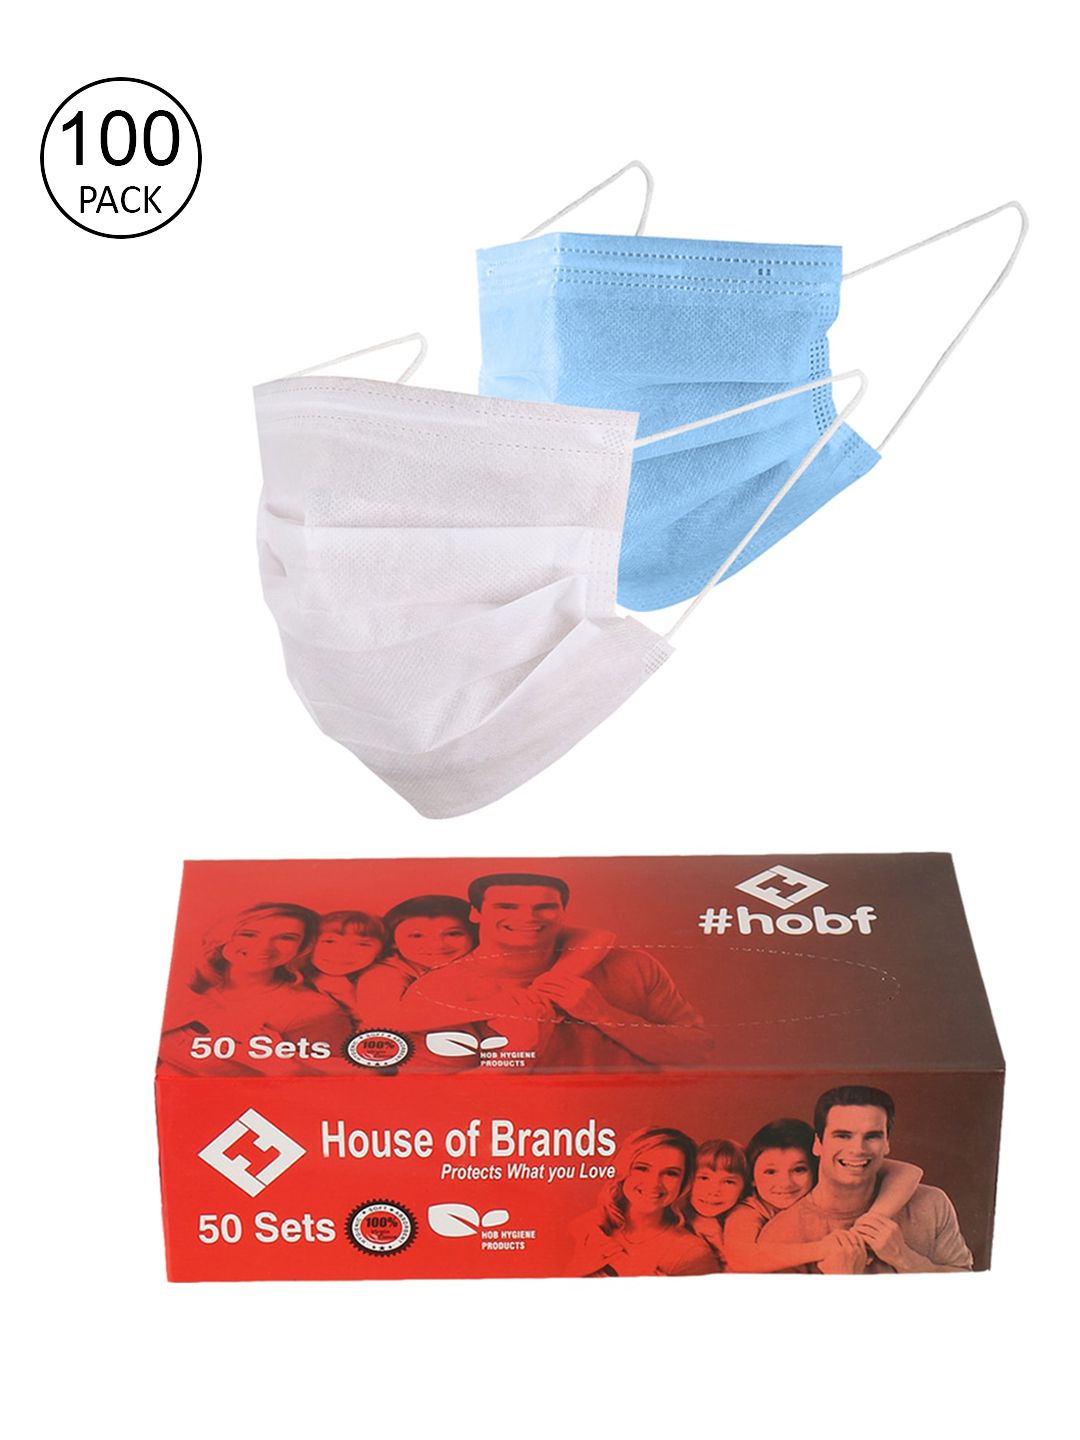 LONDON FASHION hob Unisex Pack Of 100 3-Ply Ultrasonic Anti-Pollution Disposable Masks Price in India